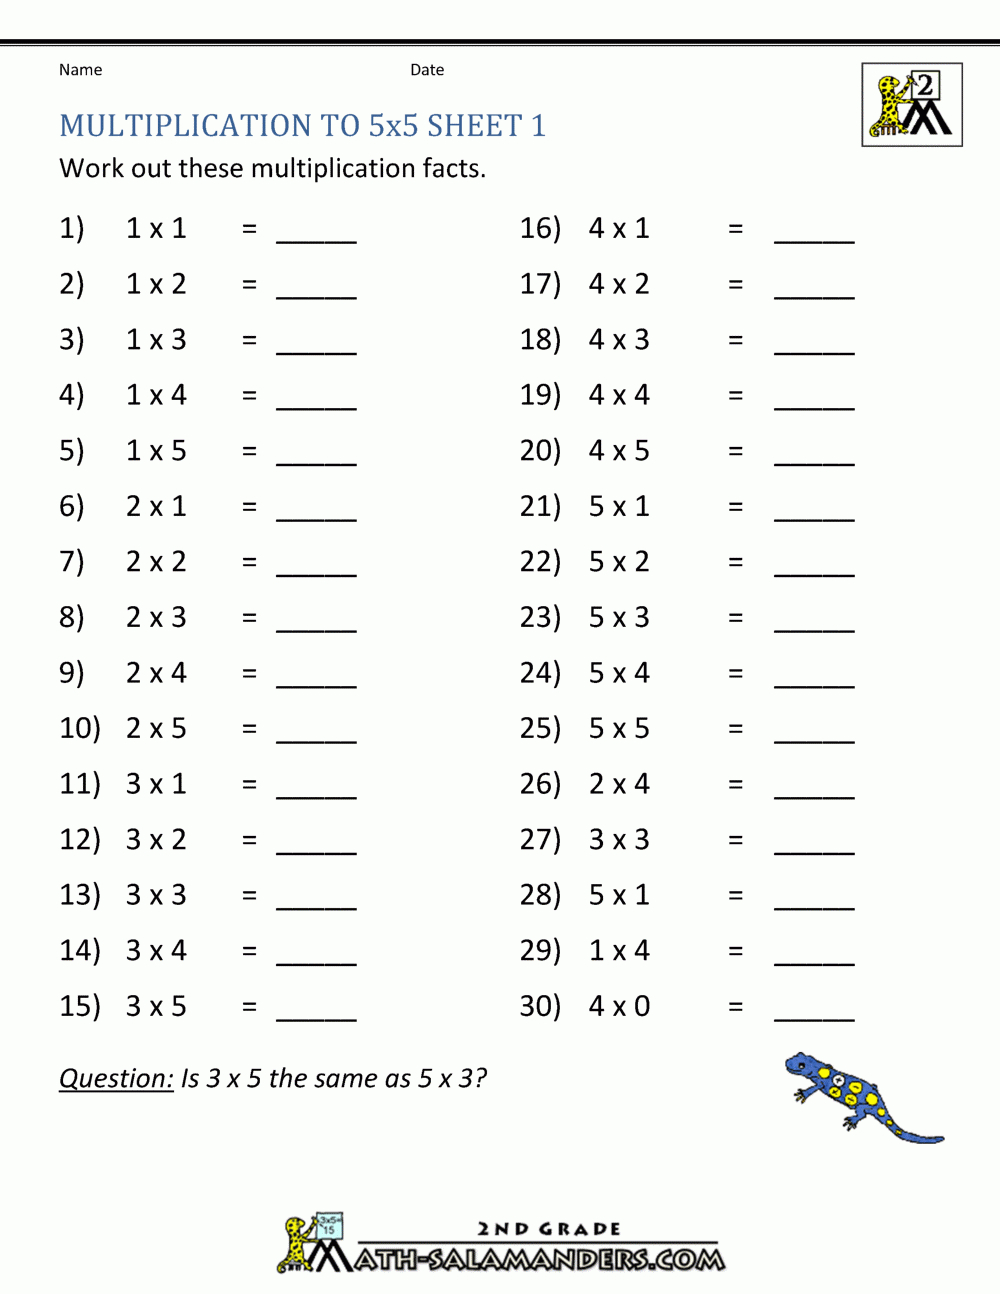 Multiplication Practice Worksheets To 5X5 intended for Worksheets On Multiplication